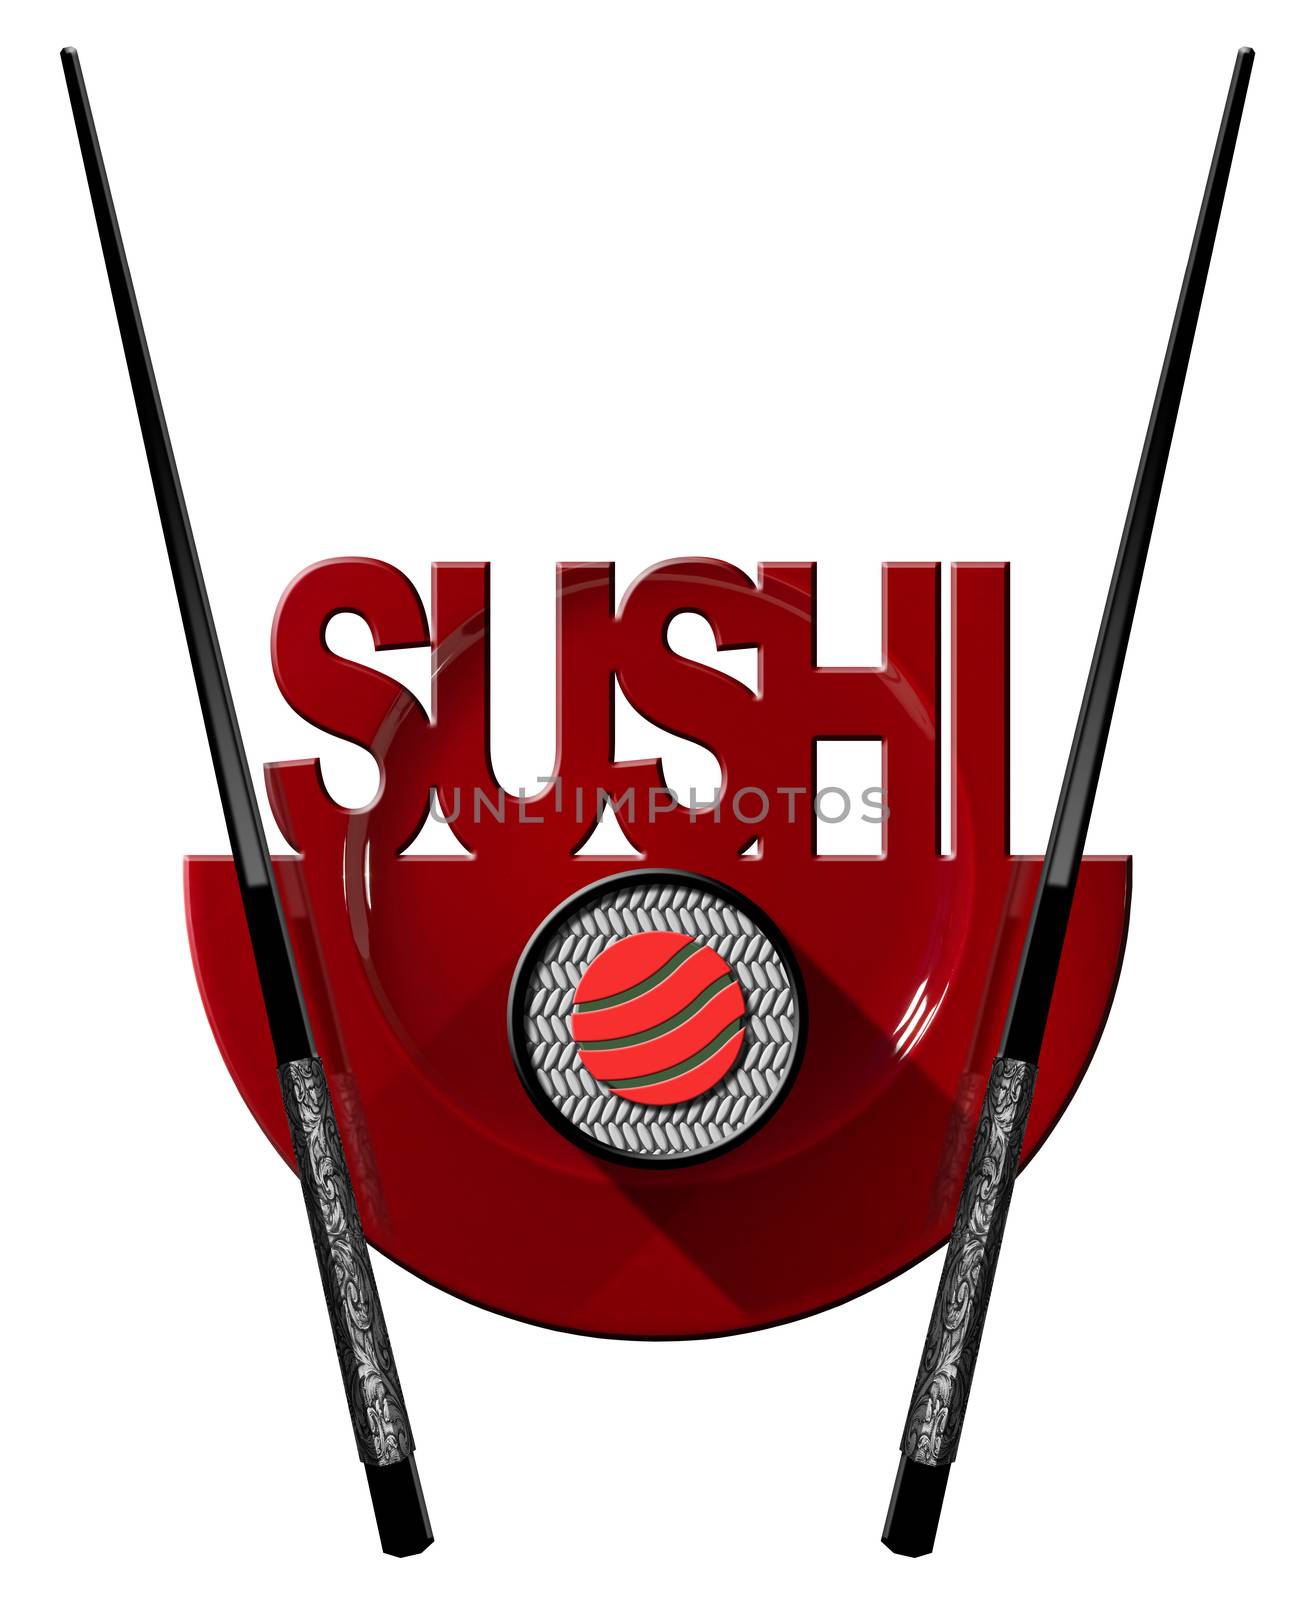 Sushi symbol with red plate, sushi roll, black and silver chopsticks and text Sushi. Isolated on white background